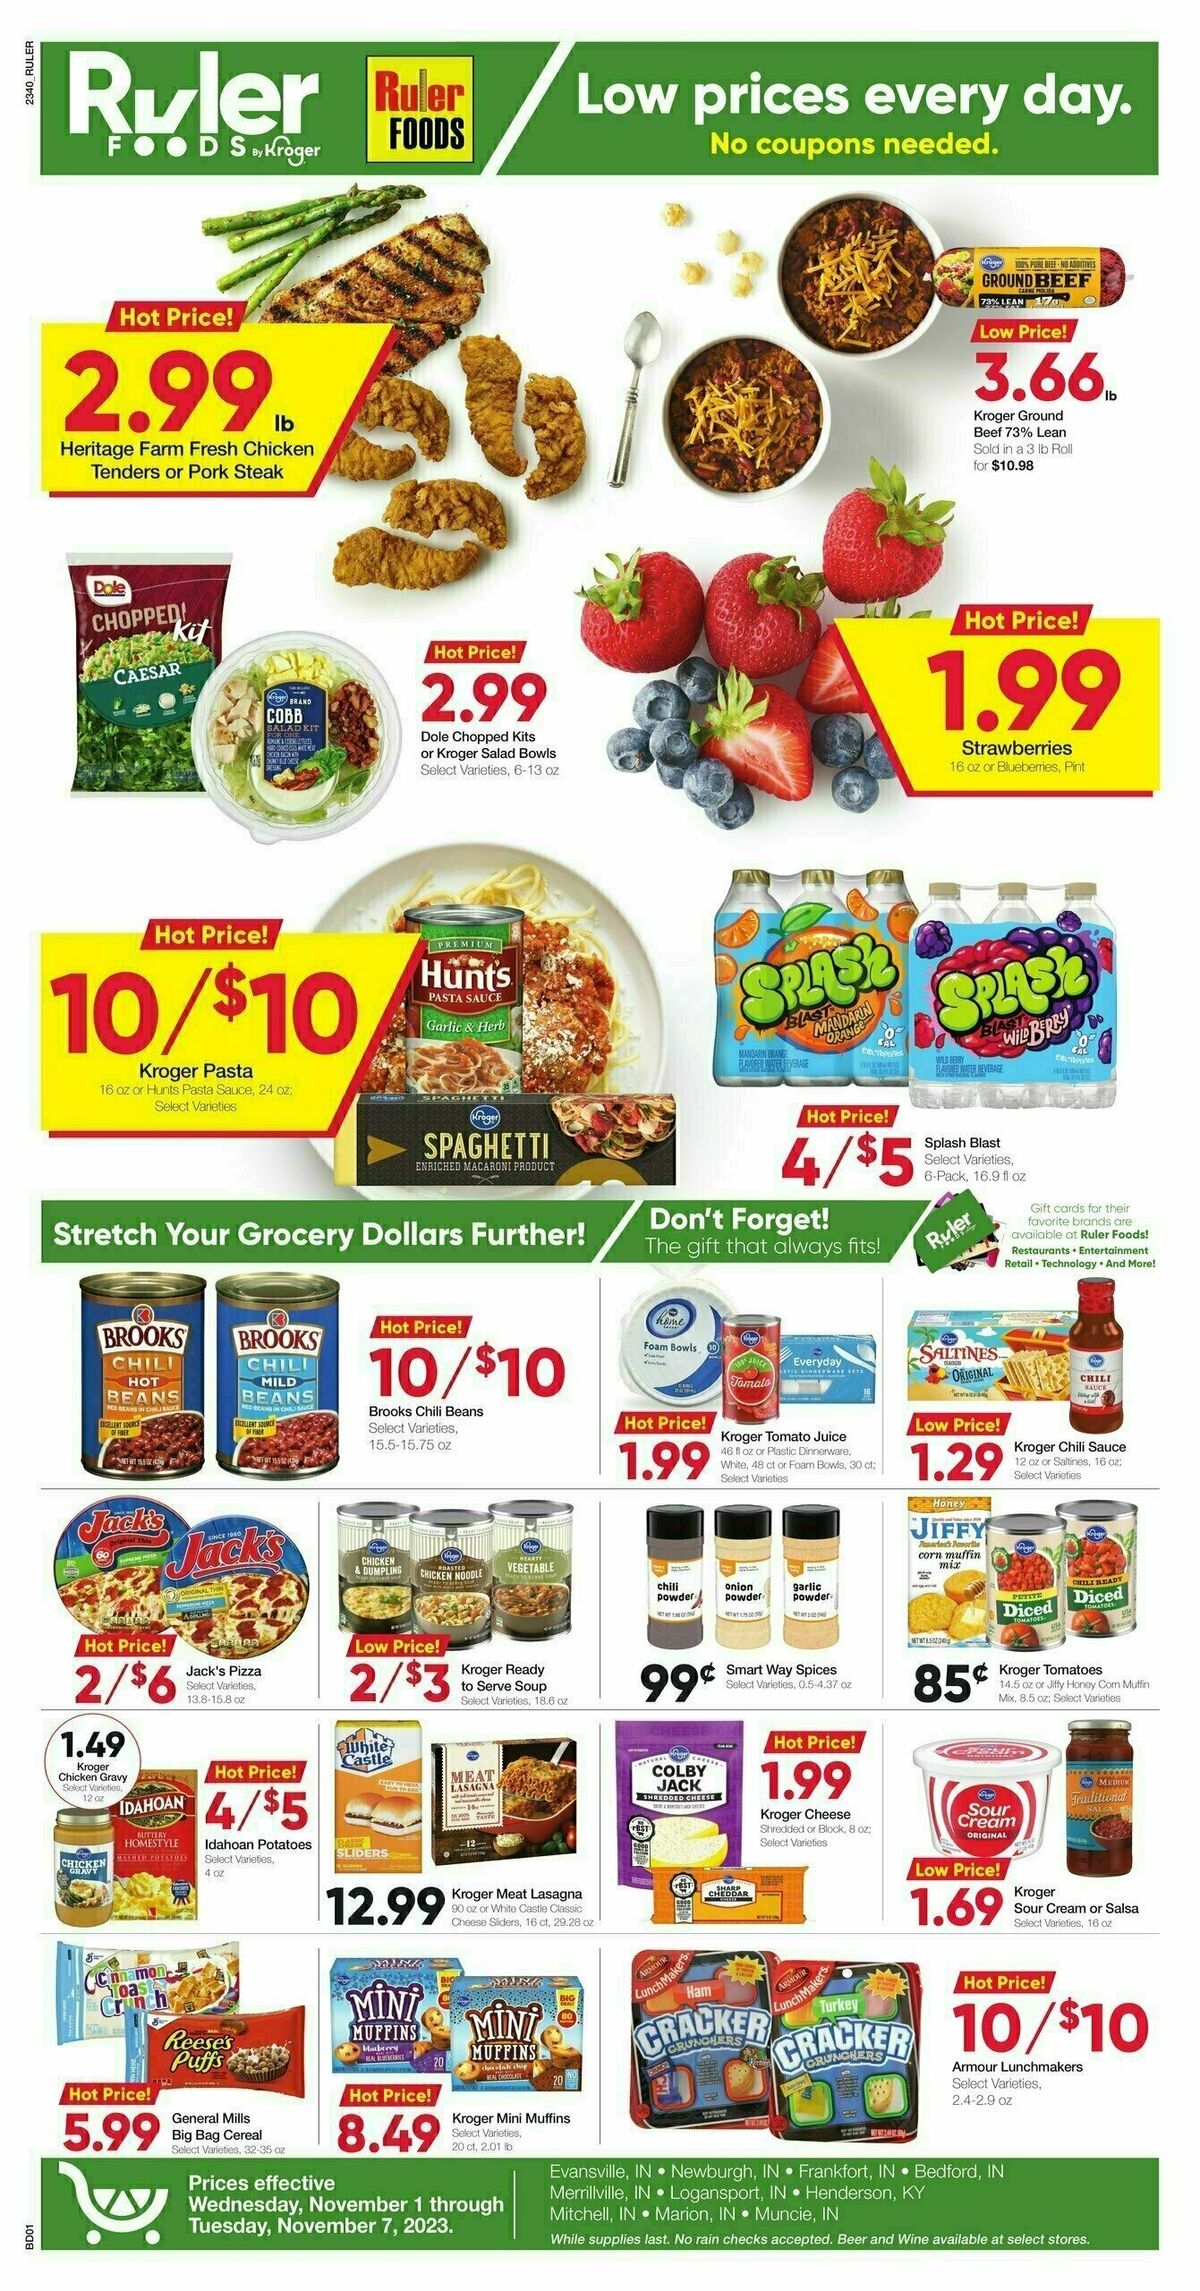 Ruler Foods Weekly Ad from November 1